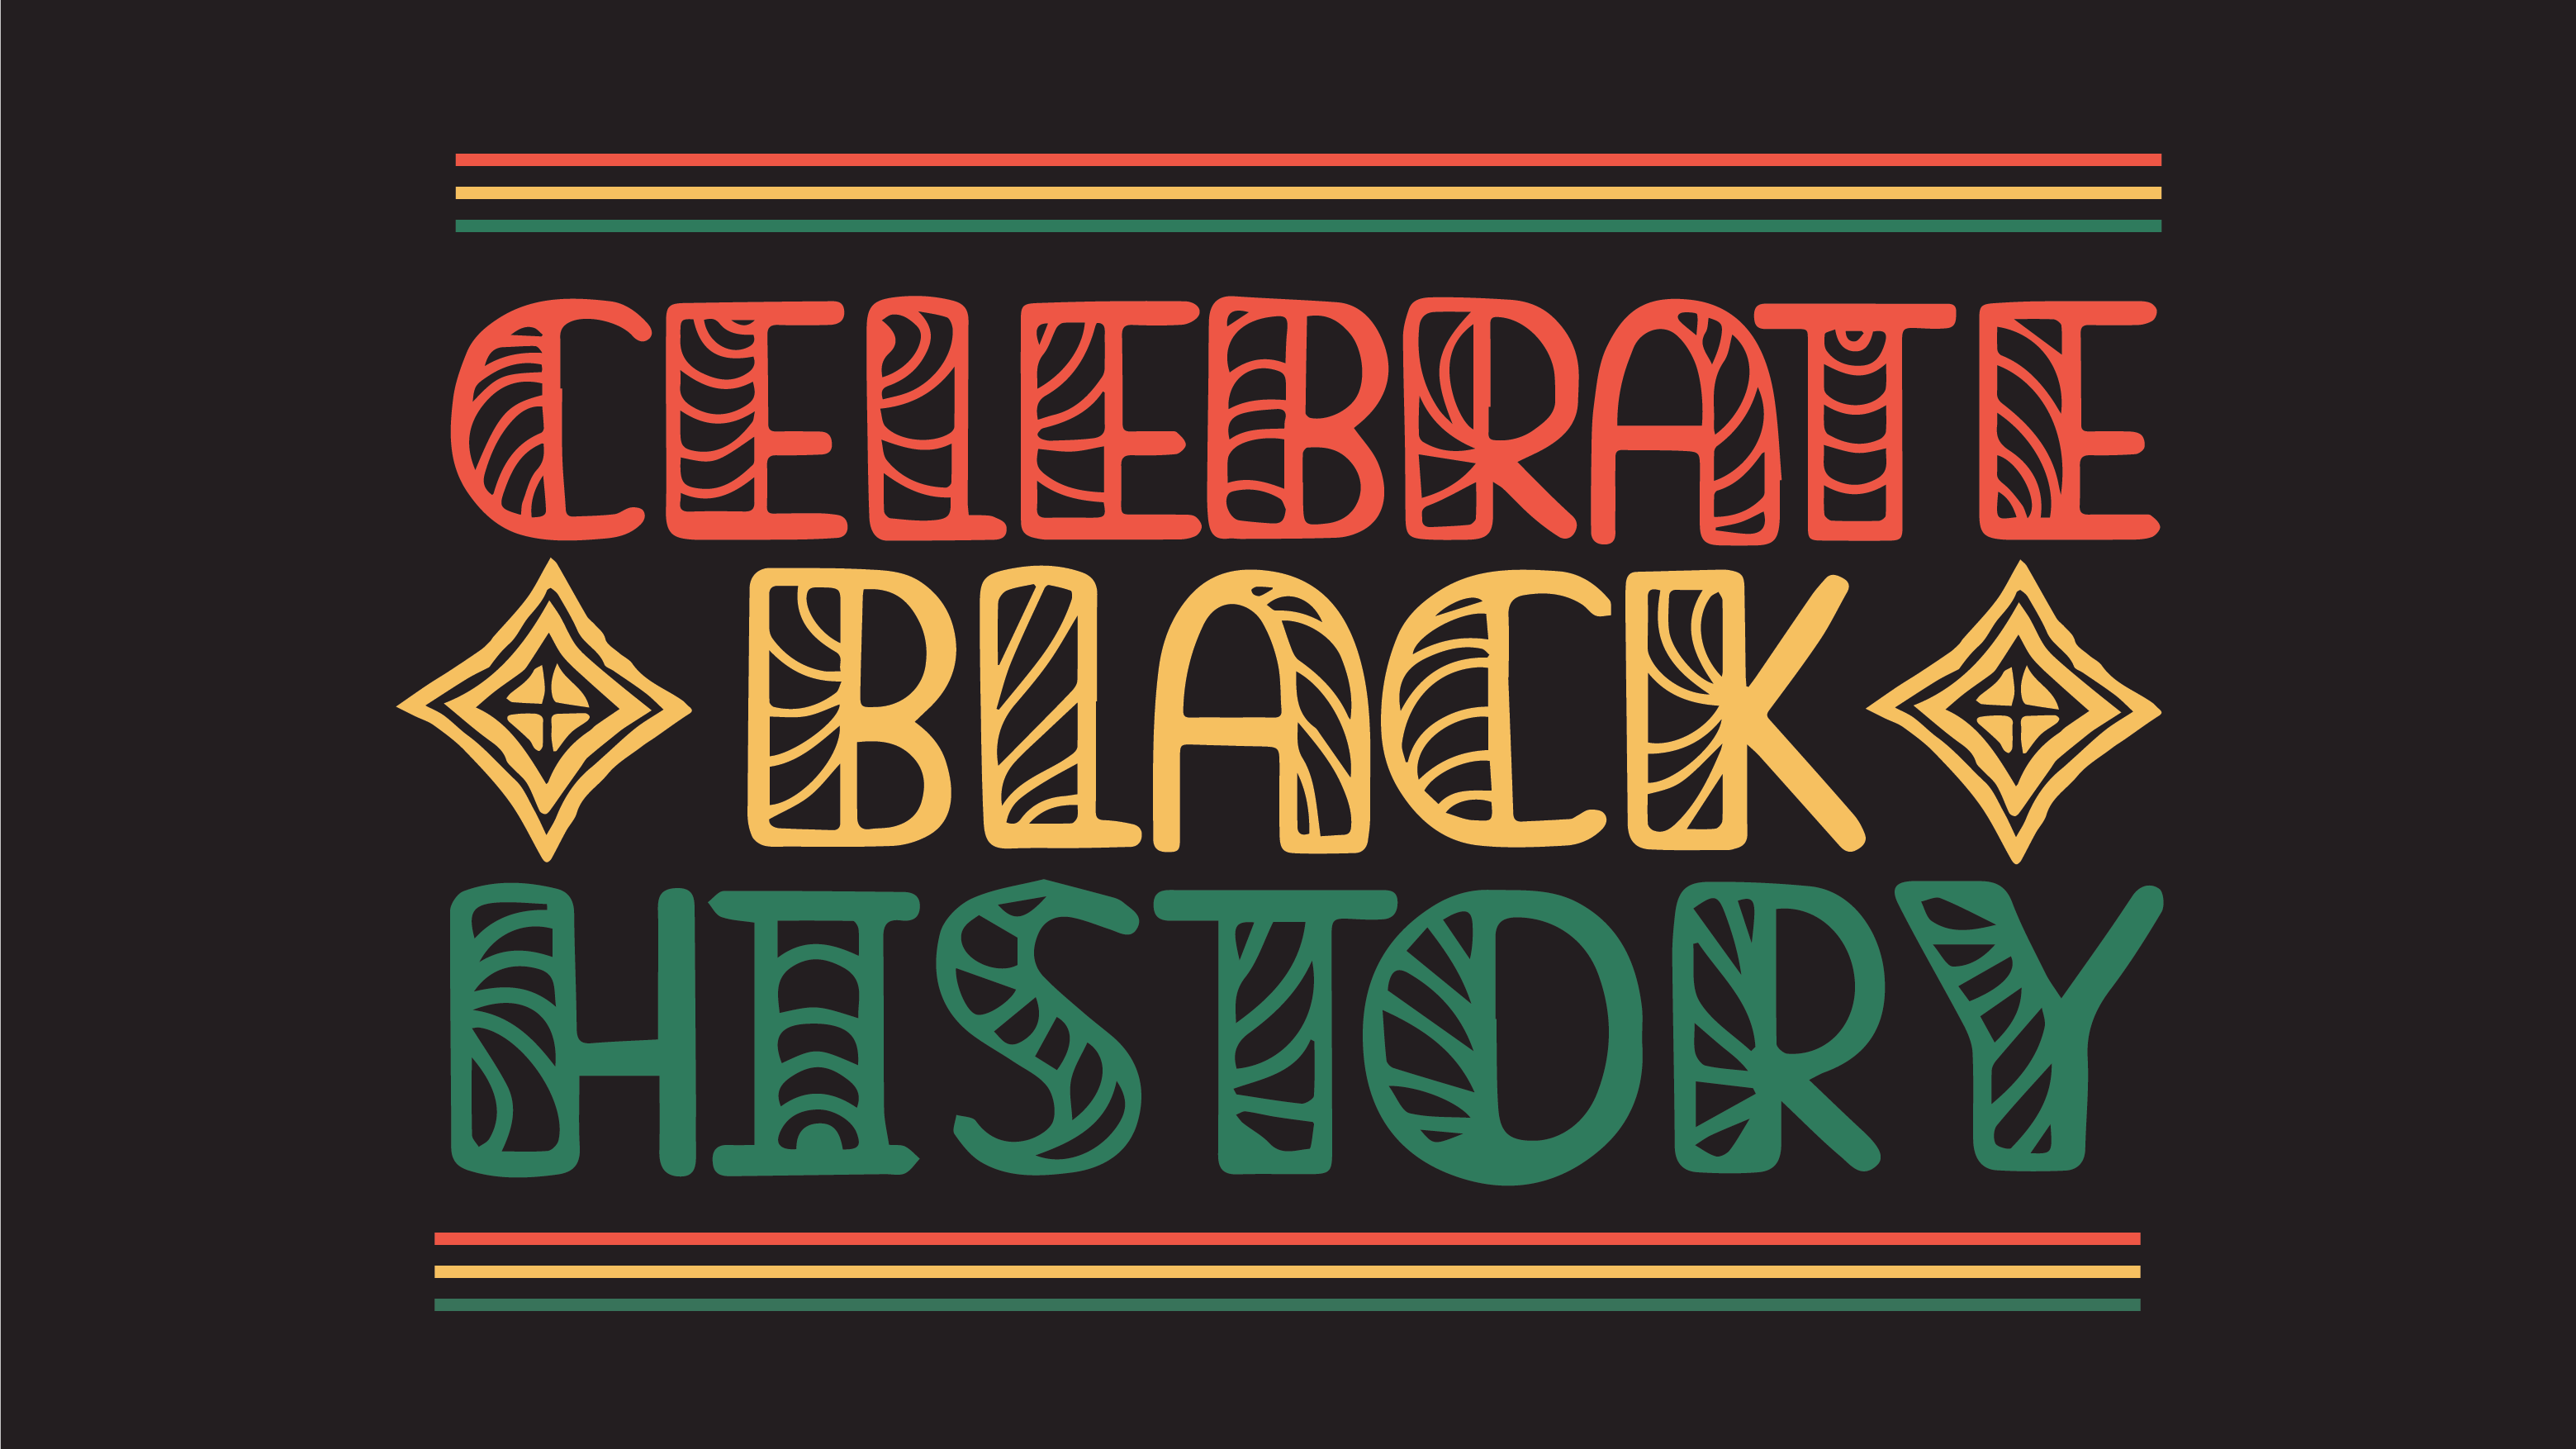 Graphic that says "Celebrate Black History"